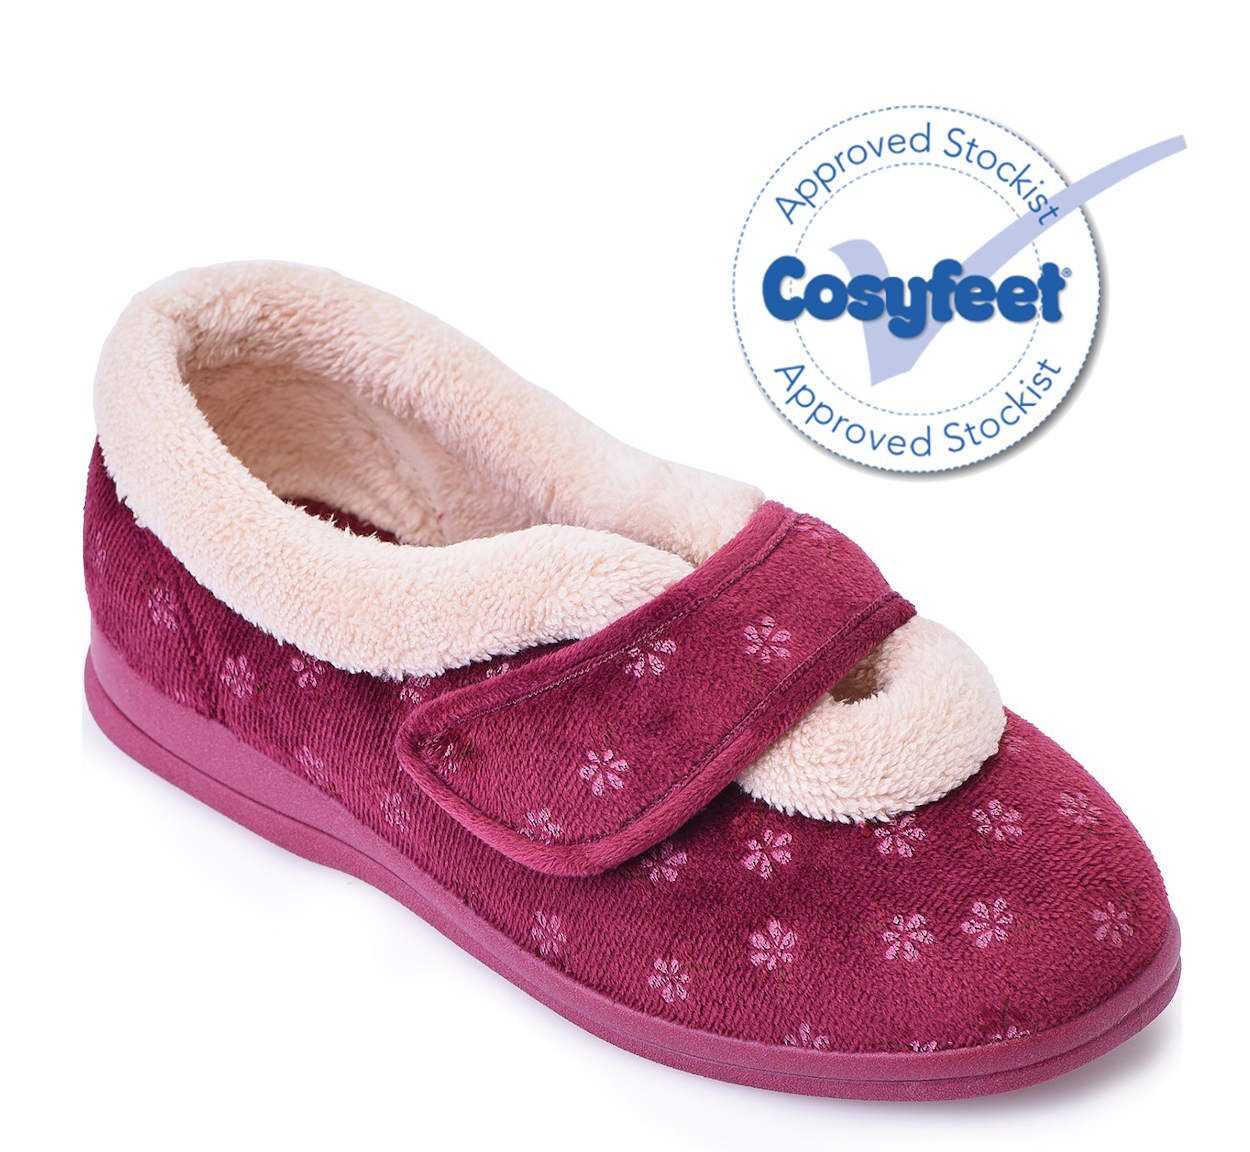 Cosyfeet - Snuggly Ladies Slippers Burgundy Floral - Rise